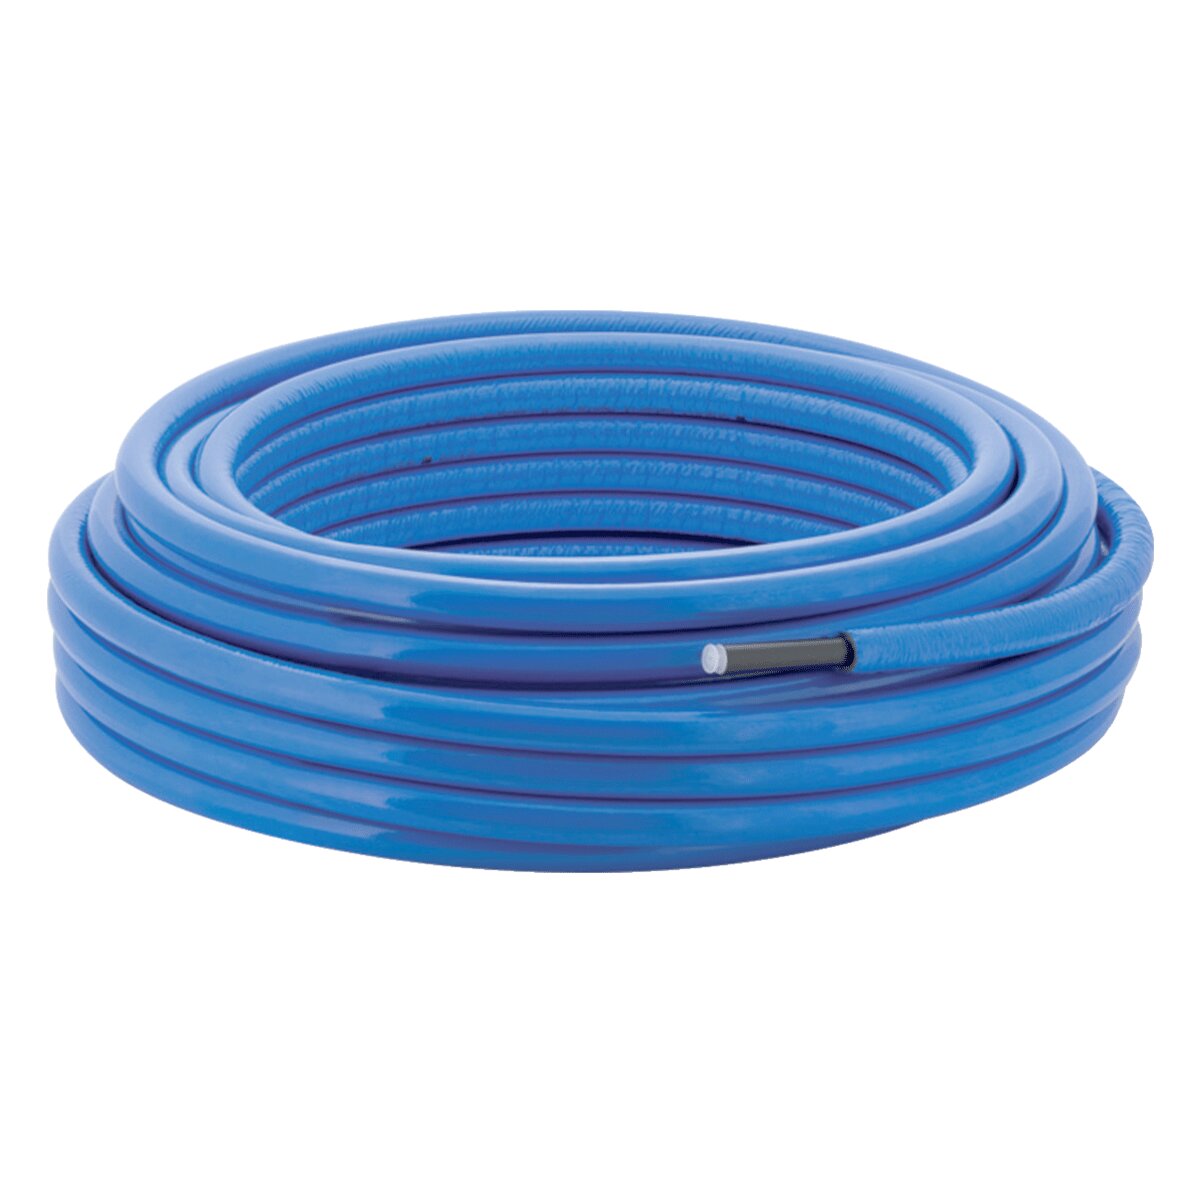 Geberit Mepla multilayer pipe Ø16x6 mm with 6 mm insulating sheath - For domestic water